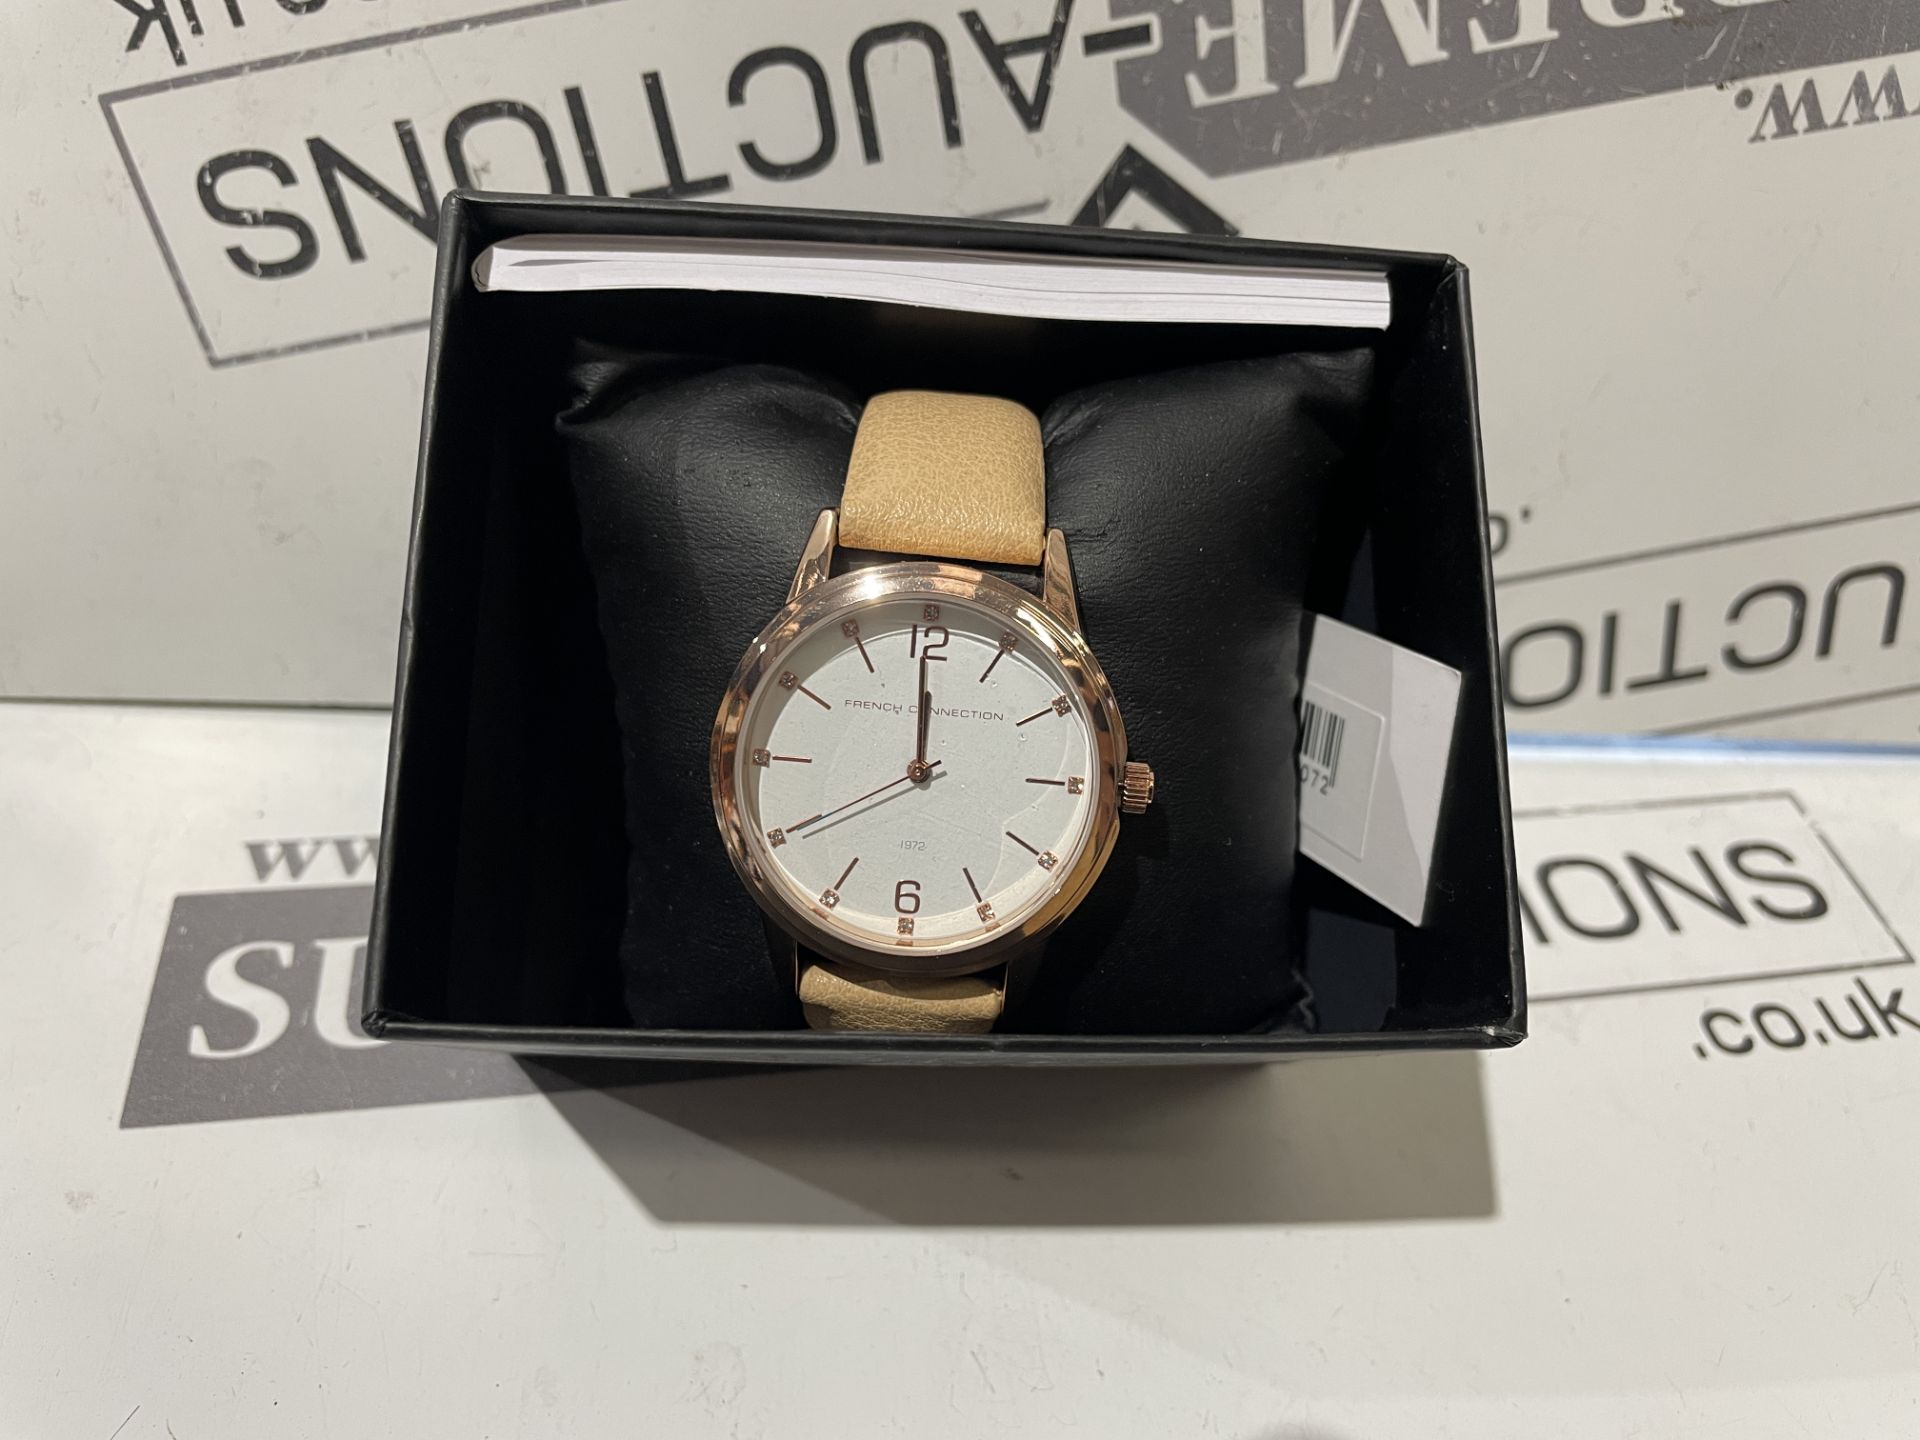 BRAND NEW FRENCH CONNECTION LADIES WRIST WATCH S/R